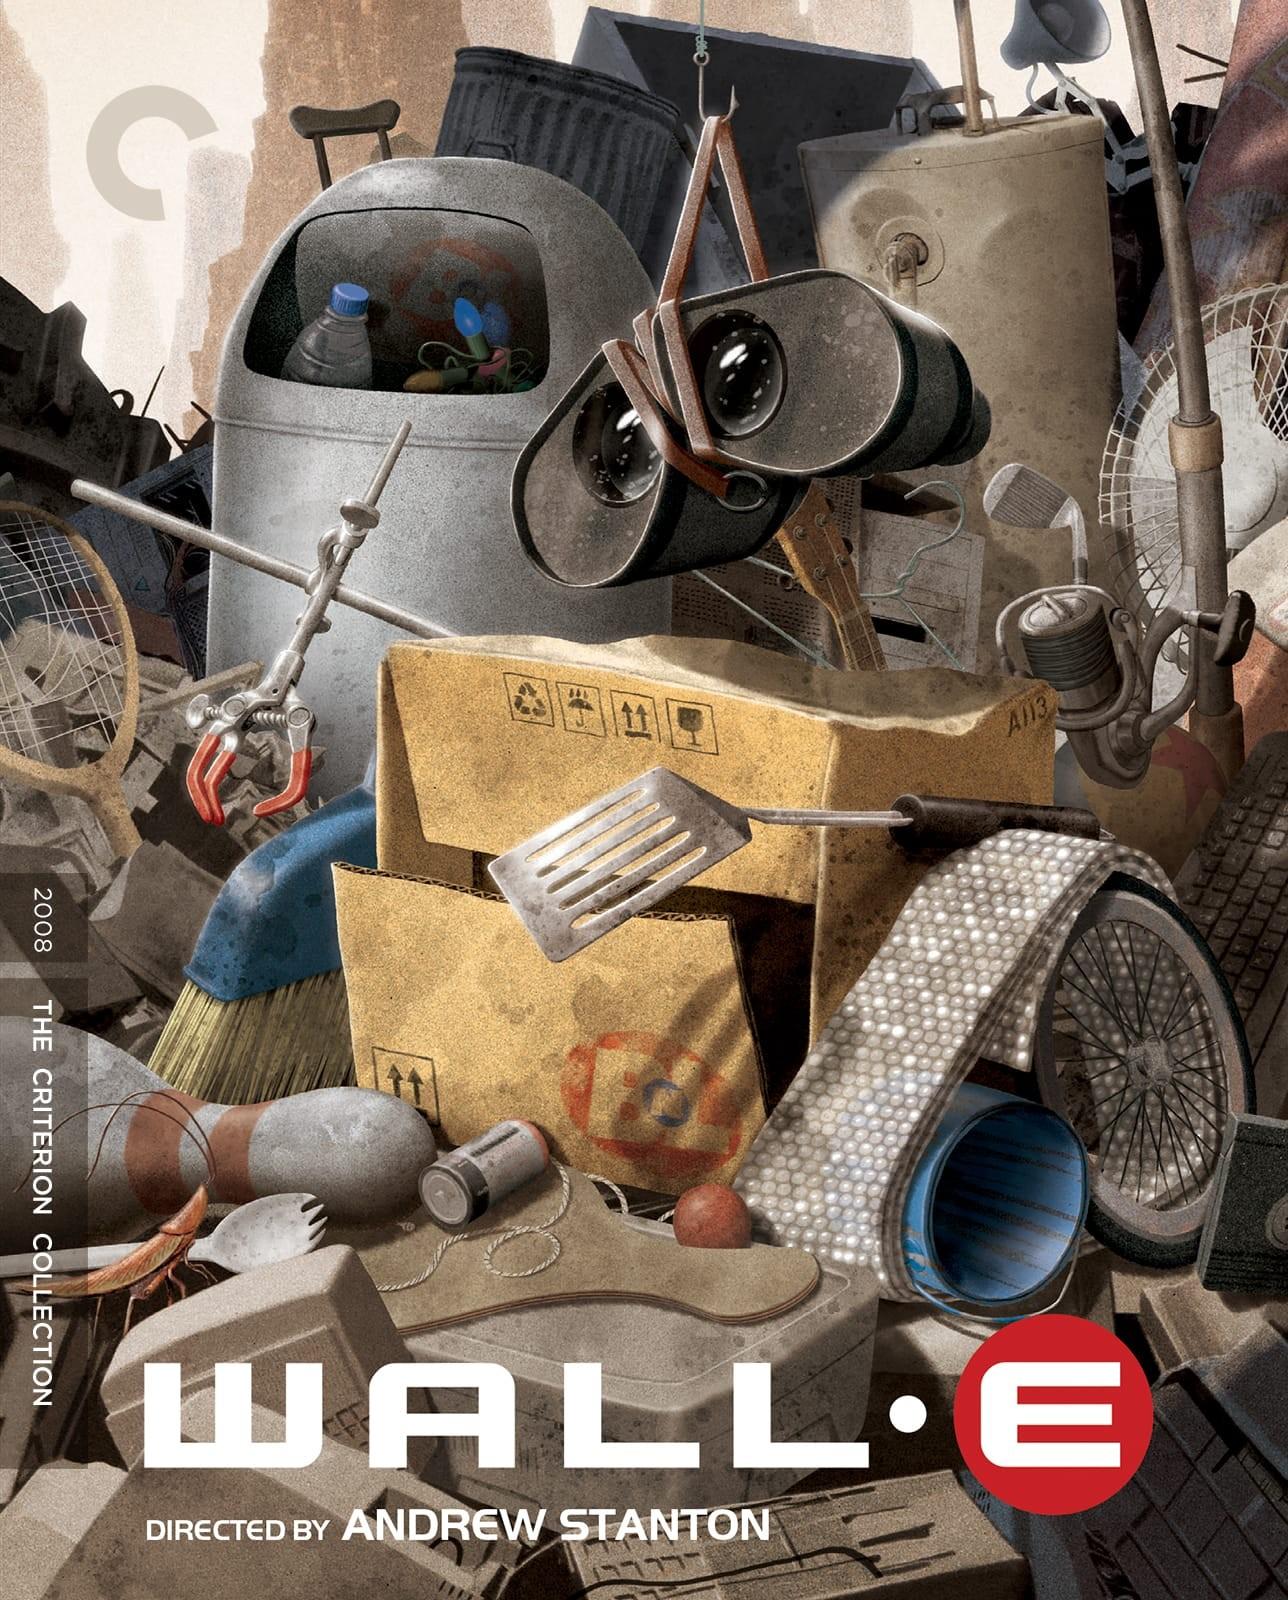 wall-e-criterion-collection-cover-pixar-cover.jpg